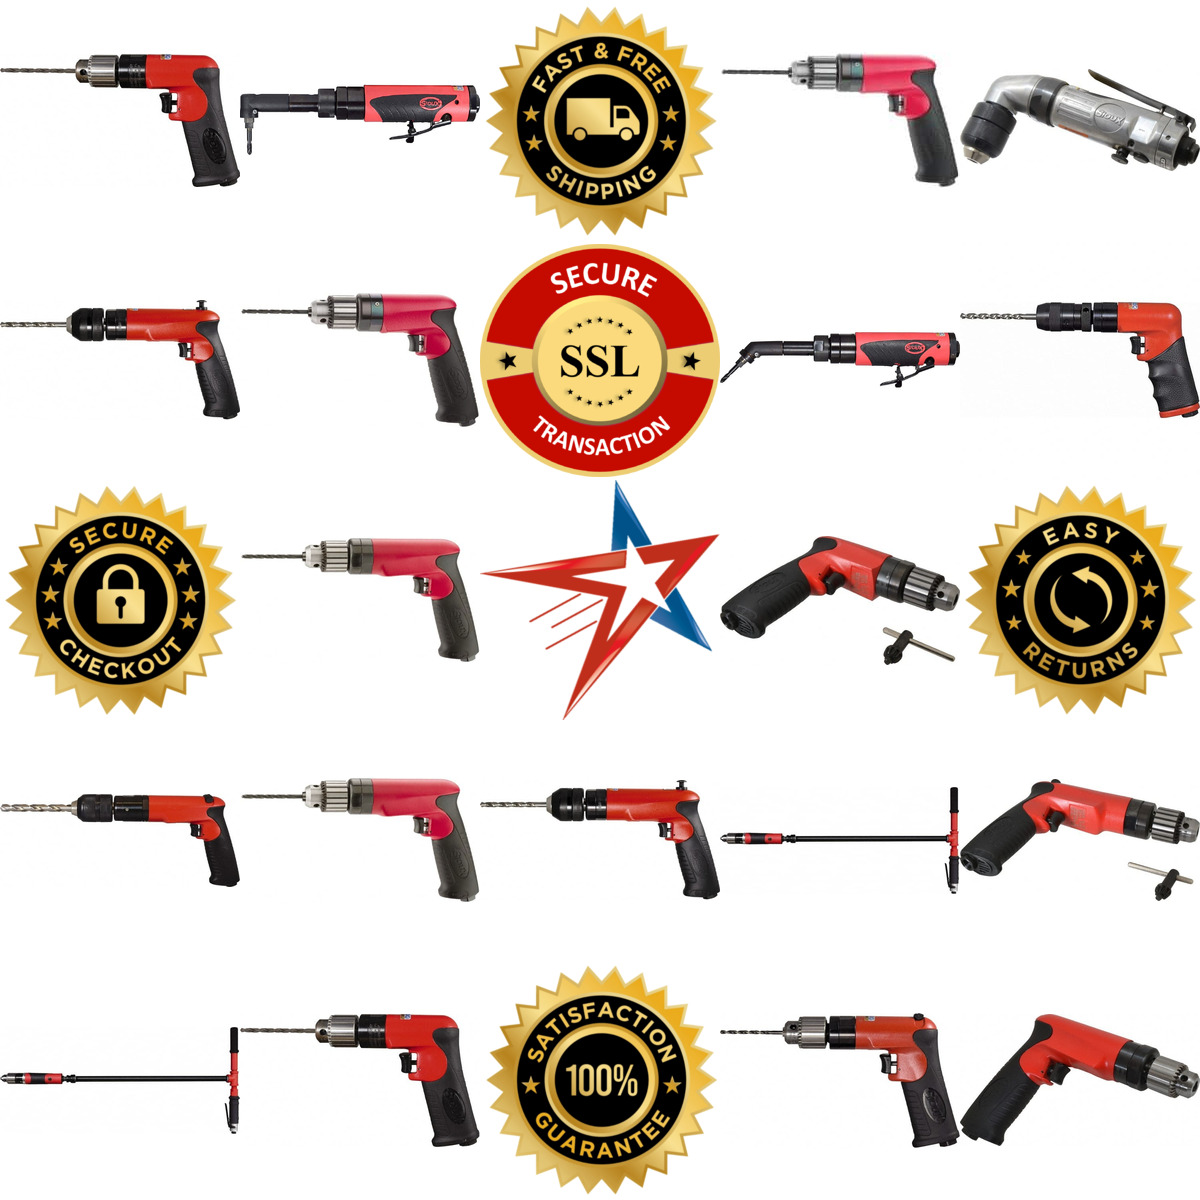 A selection of Sioux Tools products on GoVets